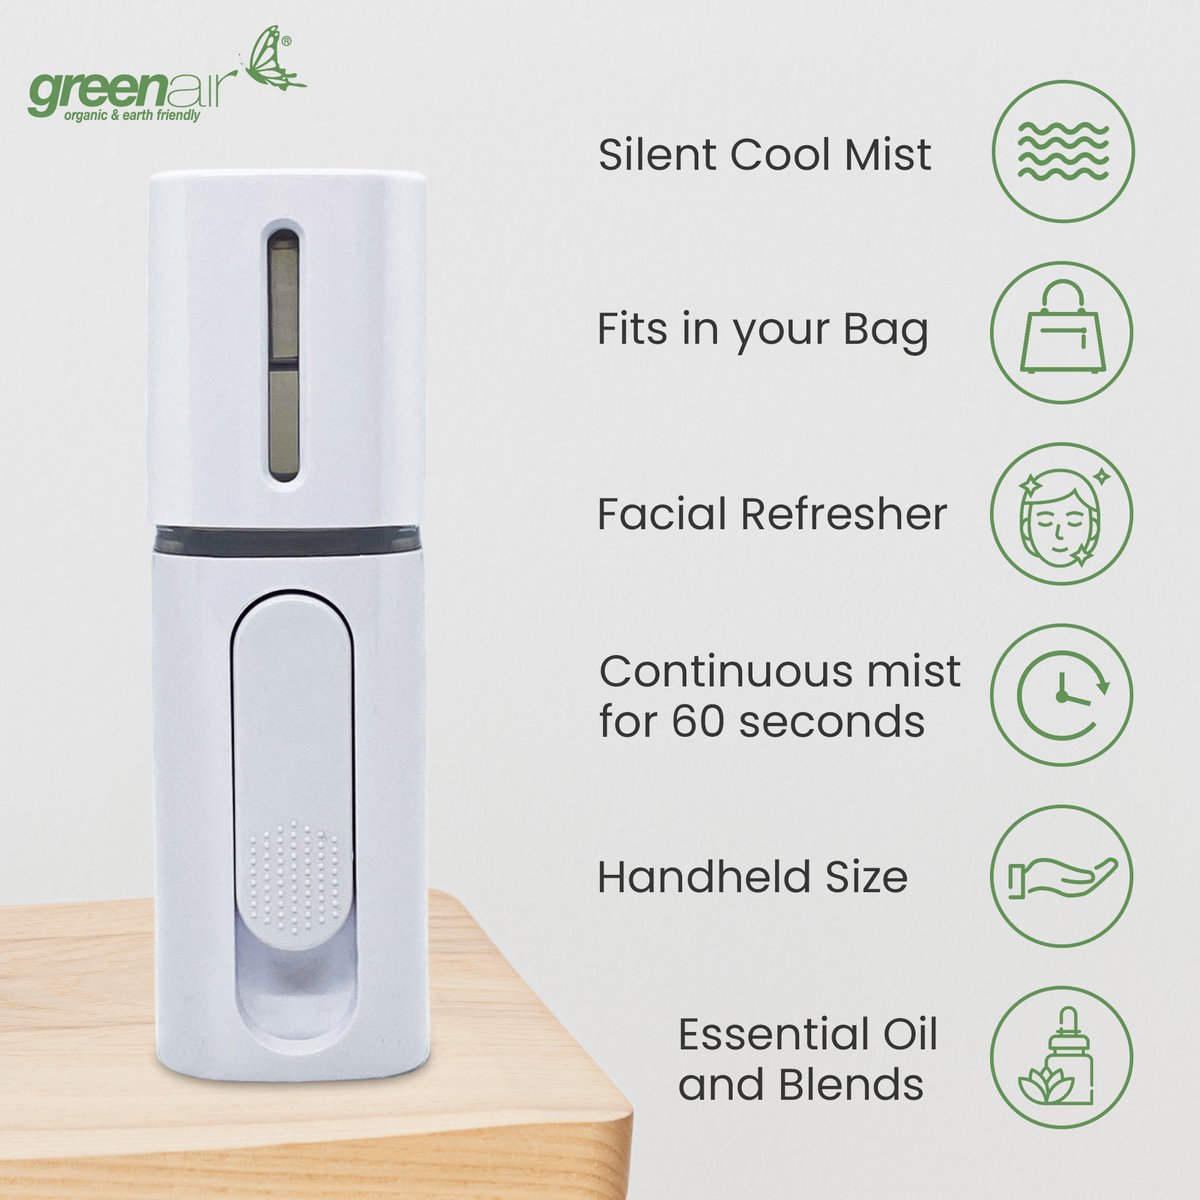 The Mini Mister portable personal sprayer adds protection wherever you go. Use this handy device to disenfect all surfaces in planes, cars, shools, offices, restrooms, anywhere you need. Buy now: newgreenair.com/product/greena…

#GreenAir #NewGreenAir #Diffuser #EssentialOils